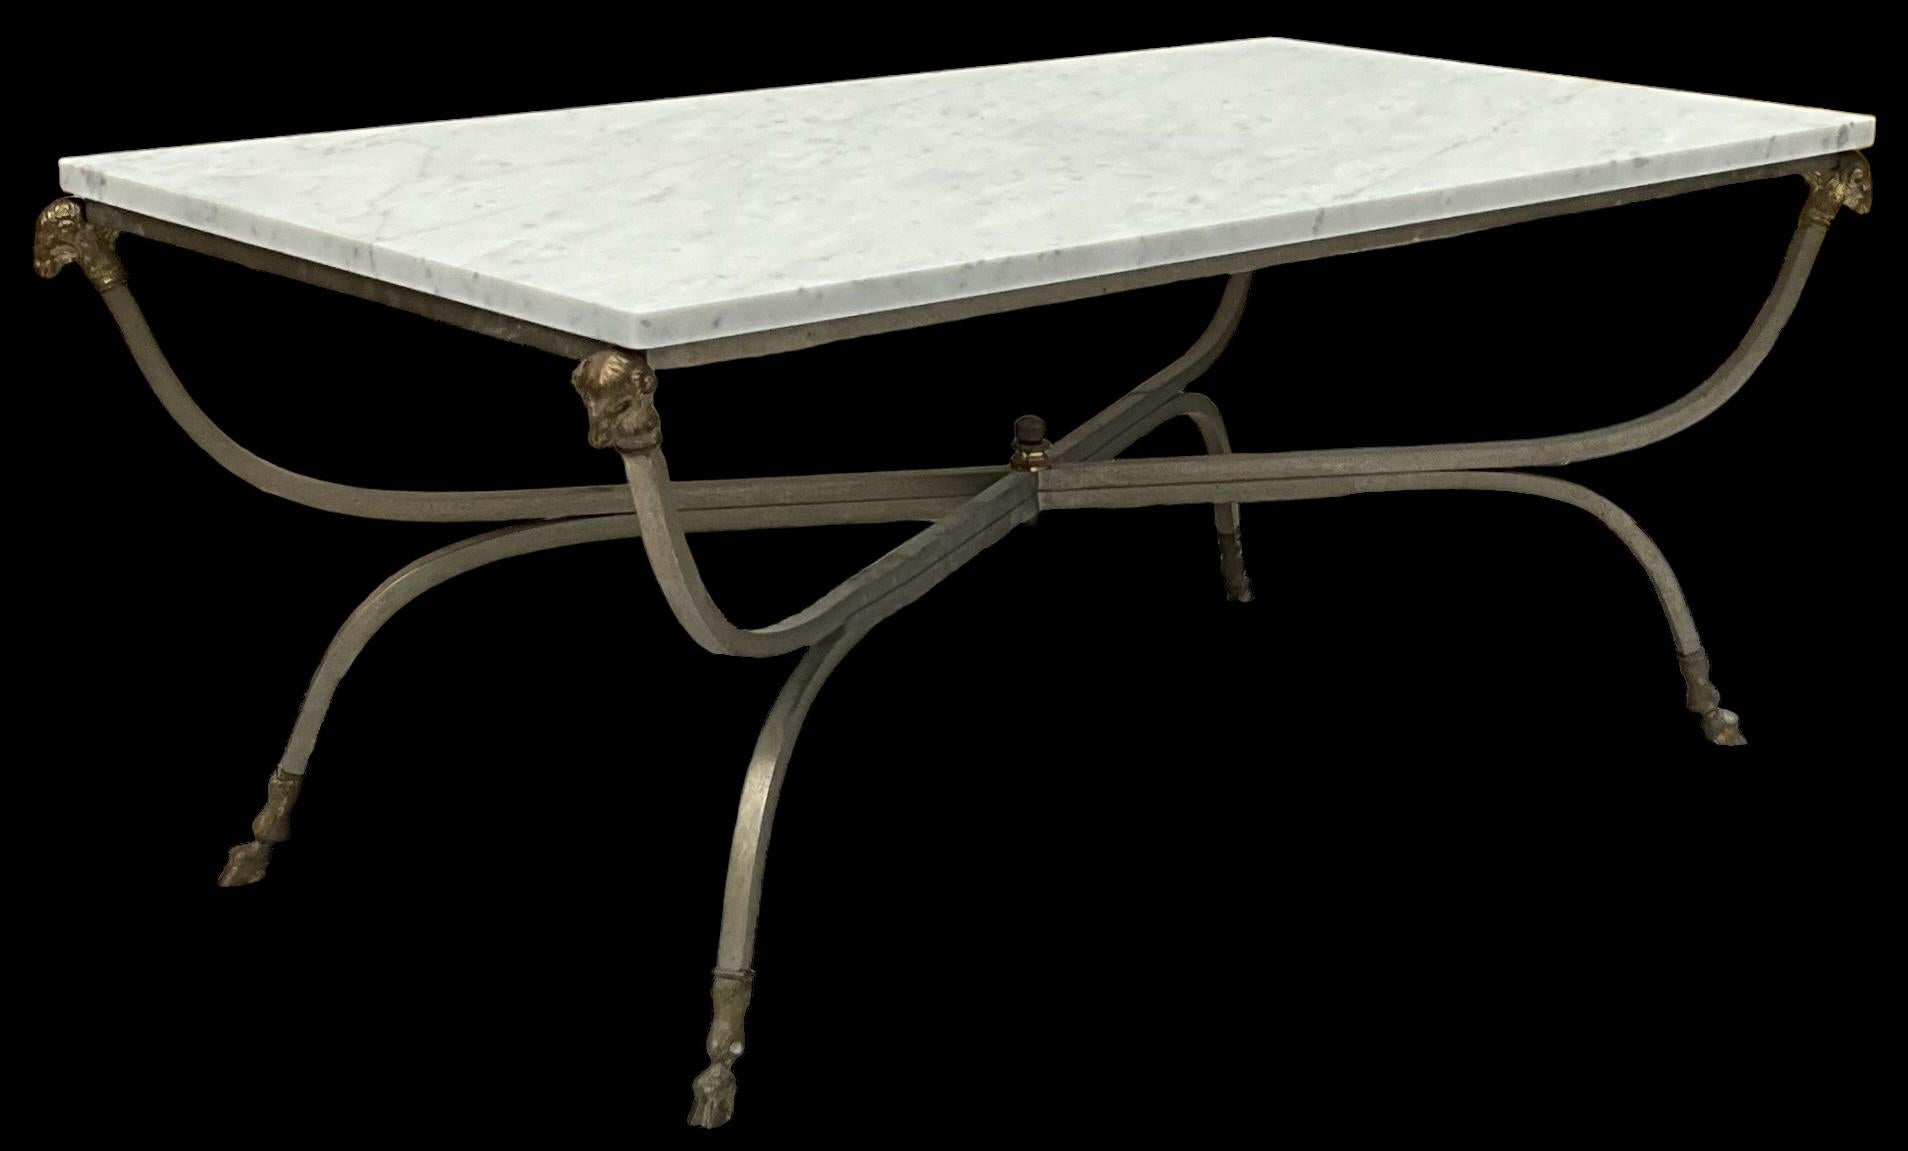 This is a 1970s Maison Jansen inspired marble top coffee table. It is Italian and marked under one hoof. The frame is steel with bronze ram’s head and hoof appointments. The white marble has a subtle grey veining. It is honed. It is in very good